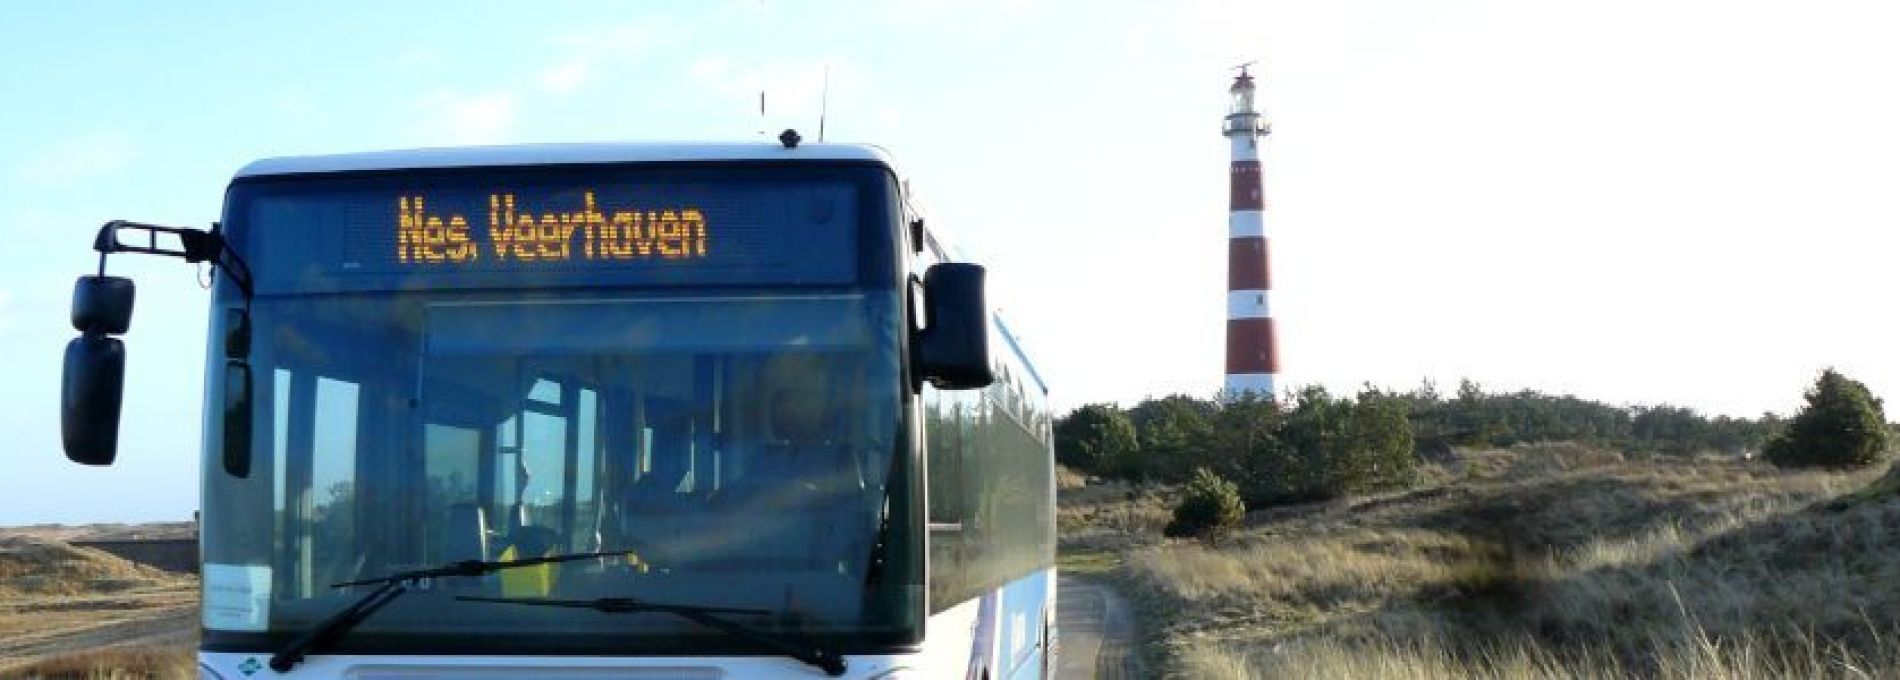 Frequently asked questions about transport to and on Ameland- Tourist Information Centre VVV Ameland.